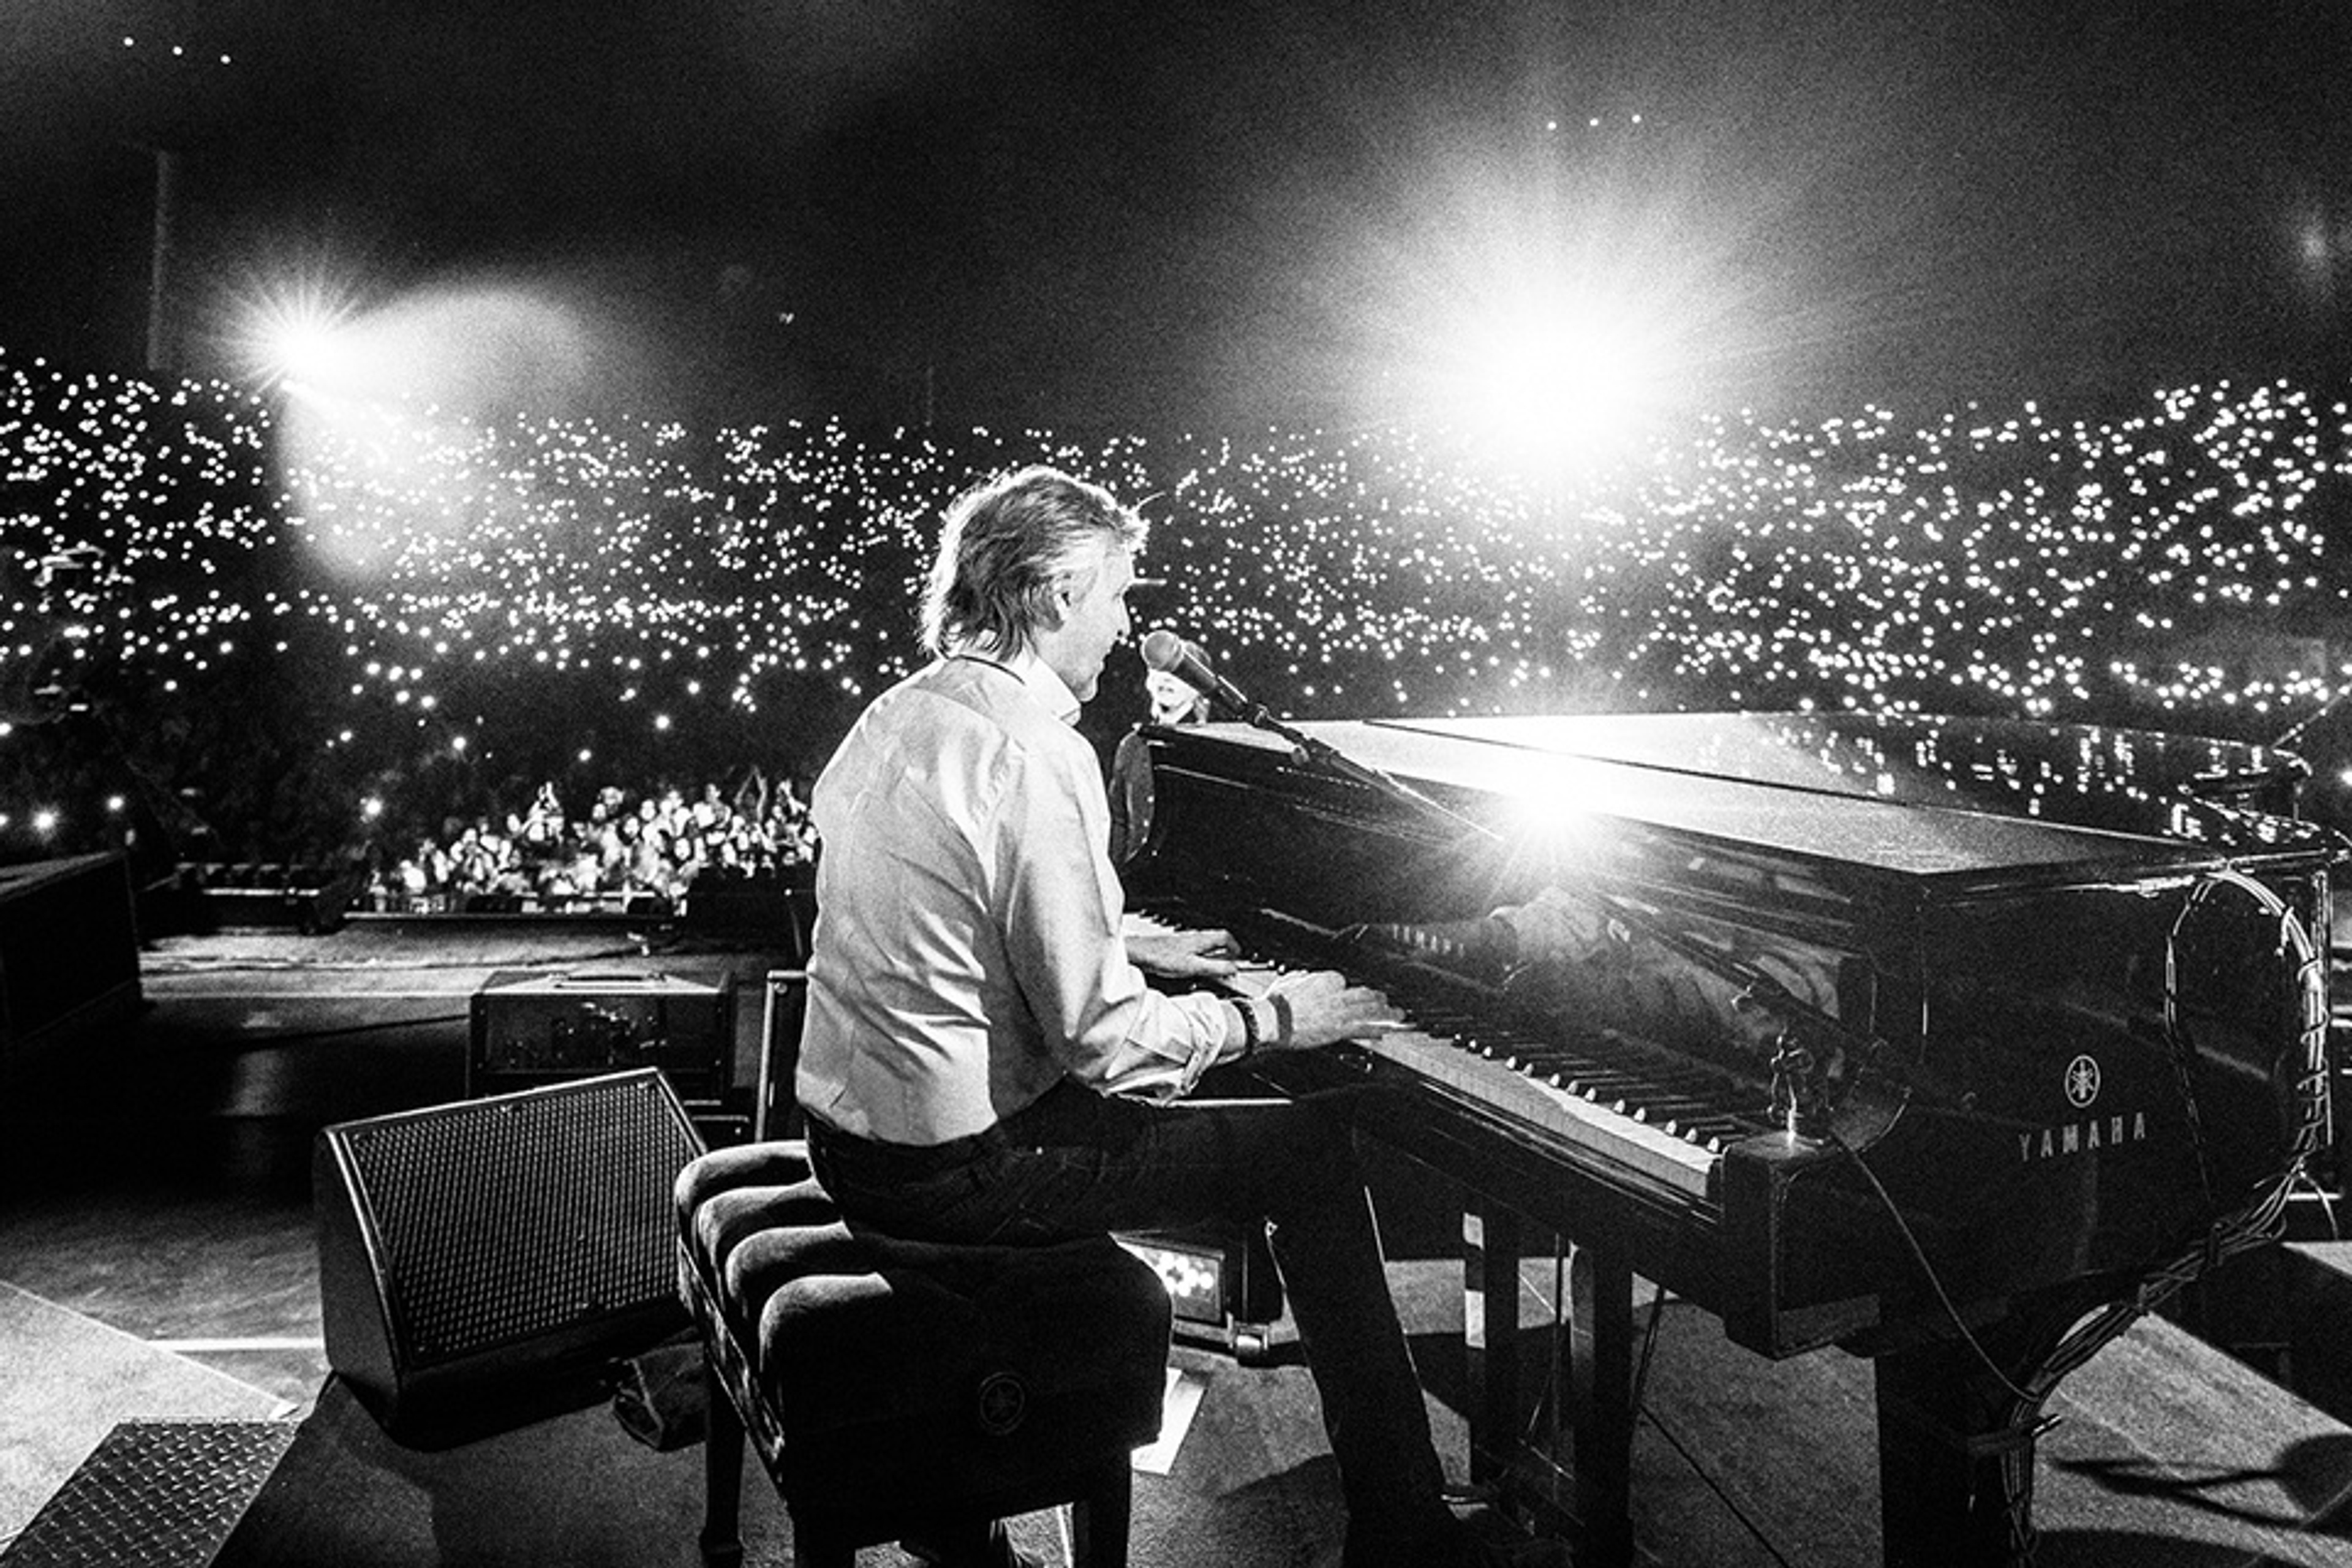 Photo from the opening night of  Paul’s South American tour at the National Stadium in Santiago, Chile.